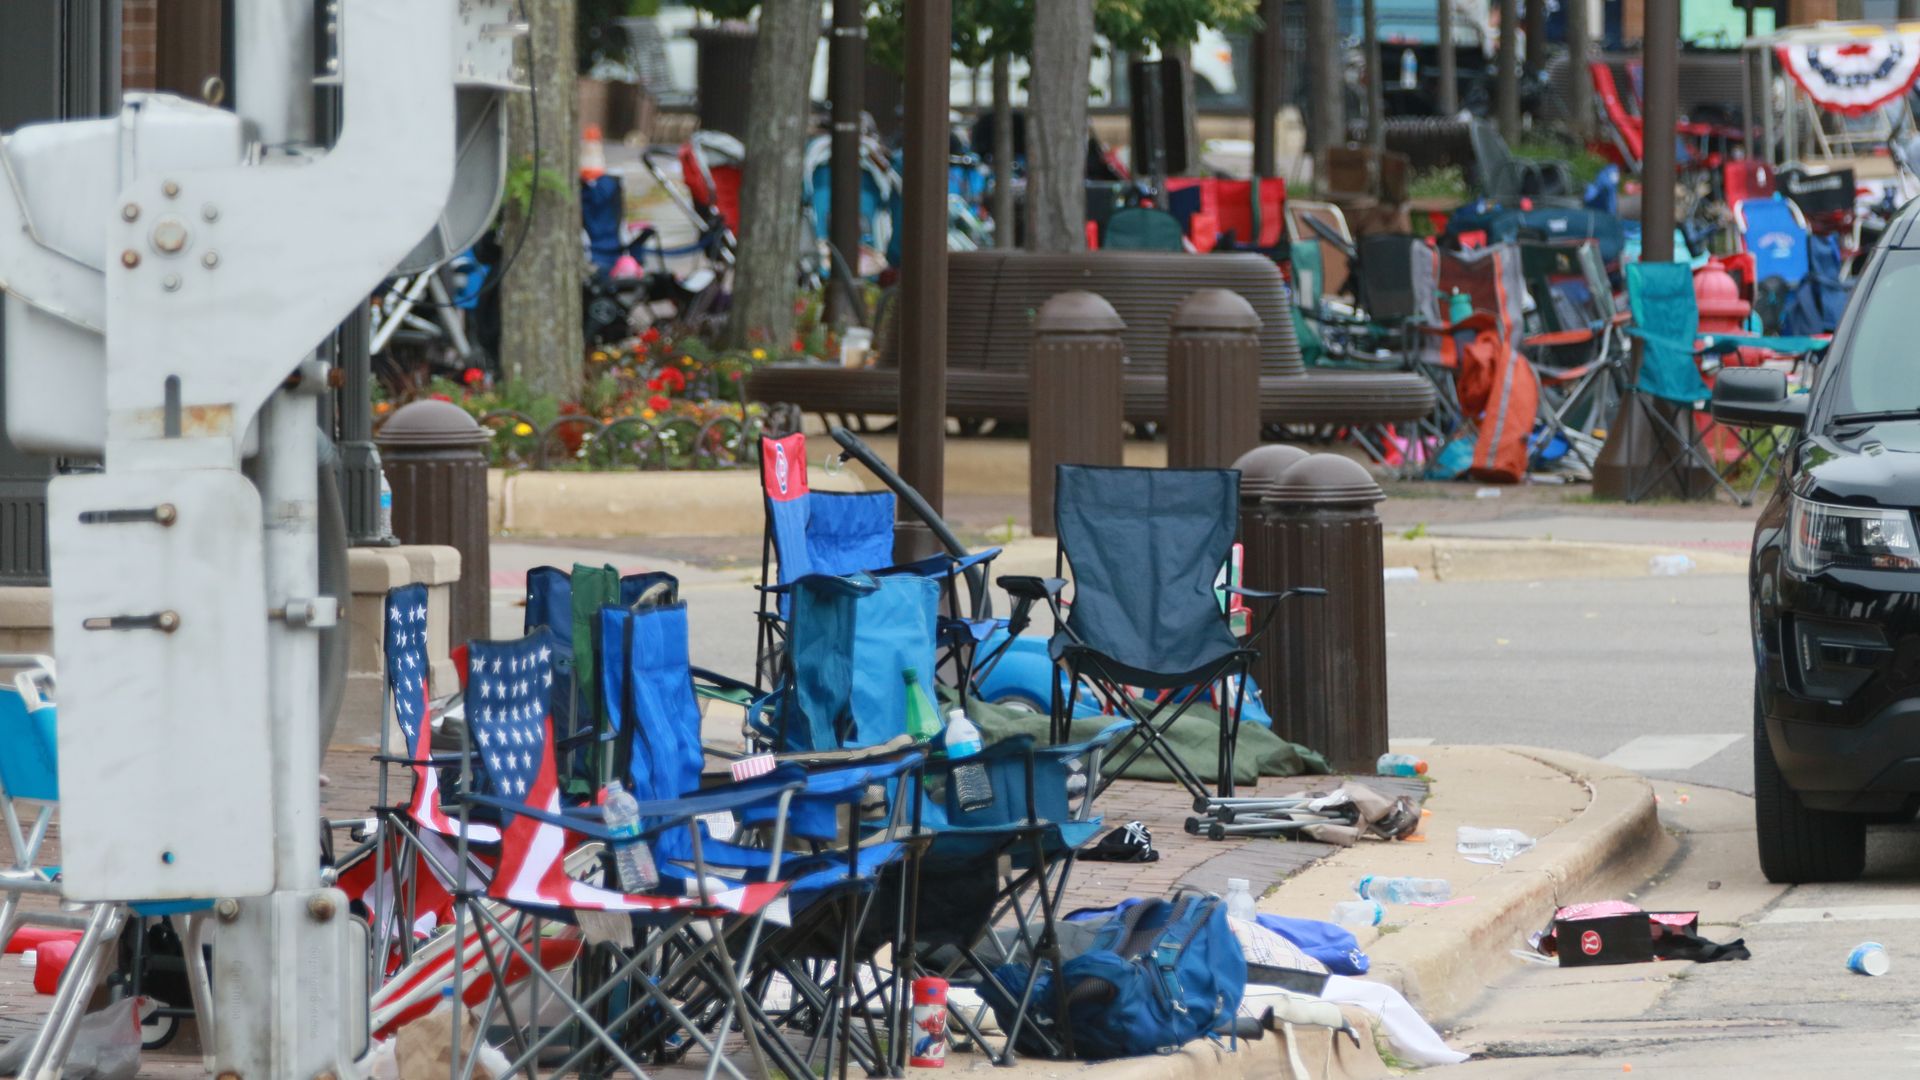  Belongings are shown left behind at the scene of a mass shooting along the route of a Fourth of July parade on July 4, 2022 in Highland Park, Illinois.